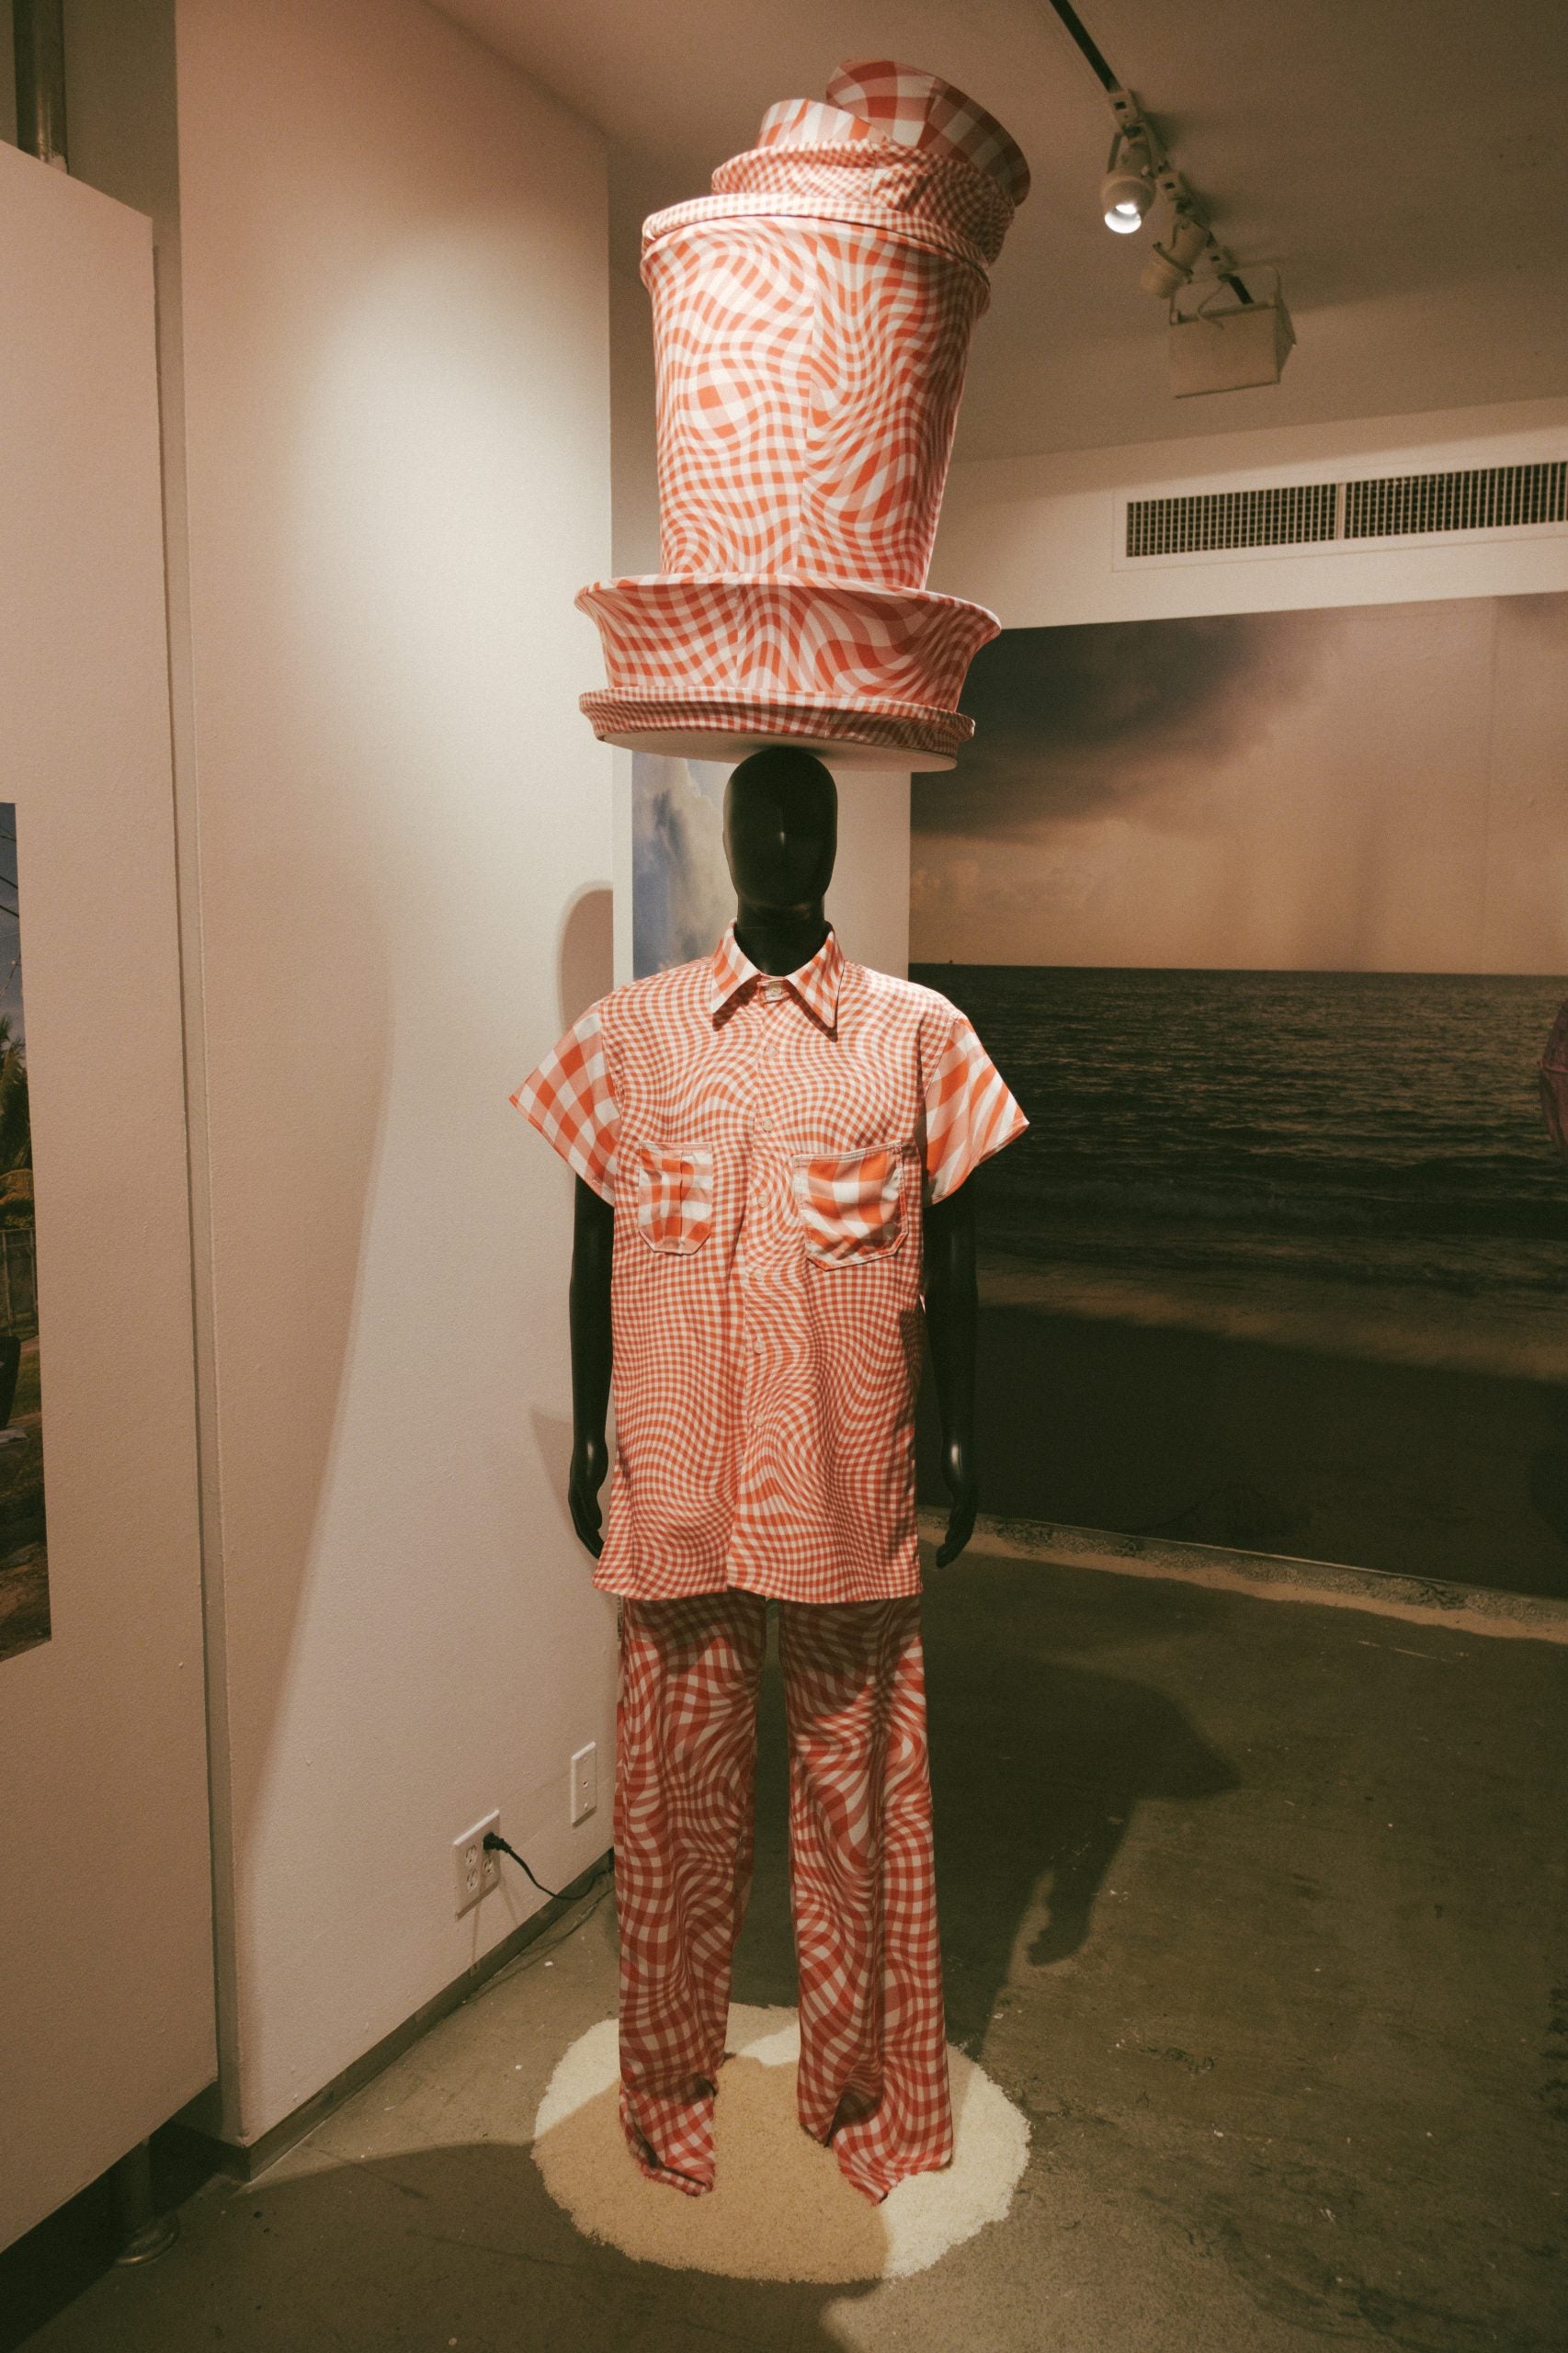 Daveed Baptiste’s Fashion Exhibition “Ti Maché” Is An Ode To His Haitian Heritage 